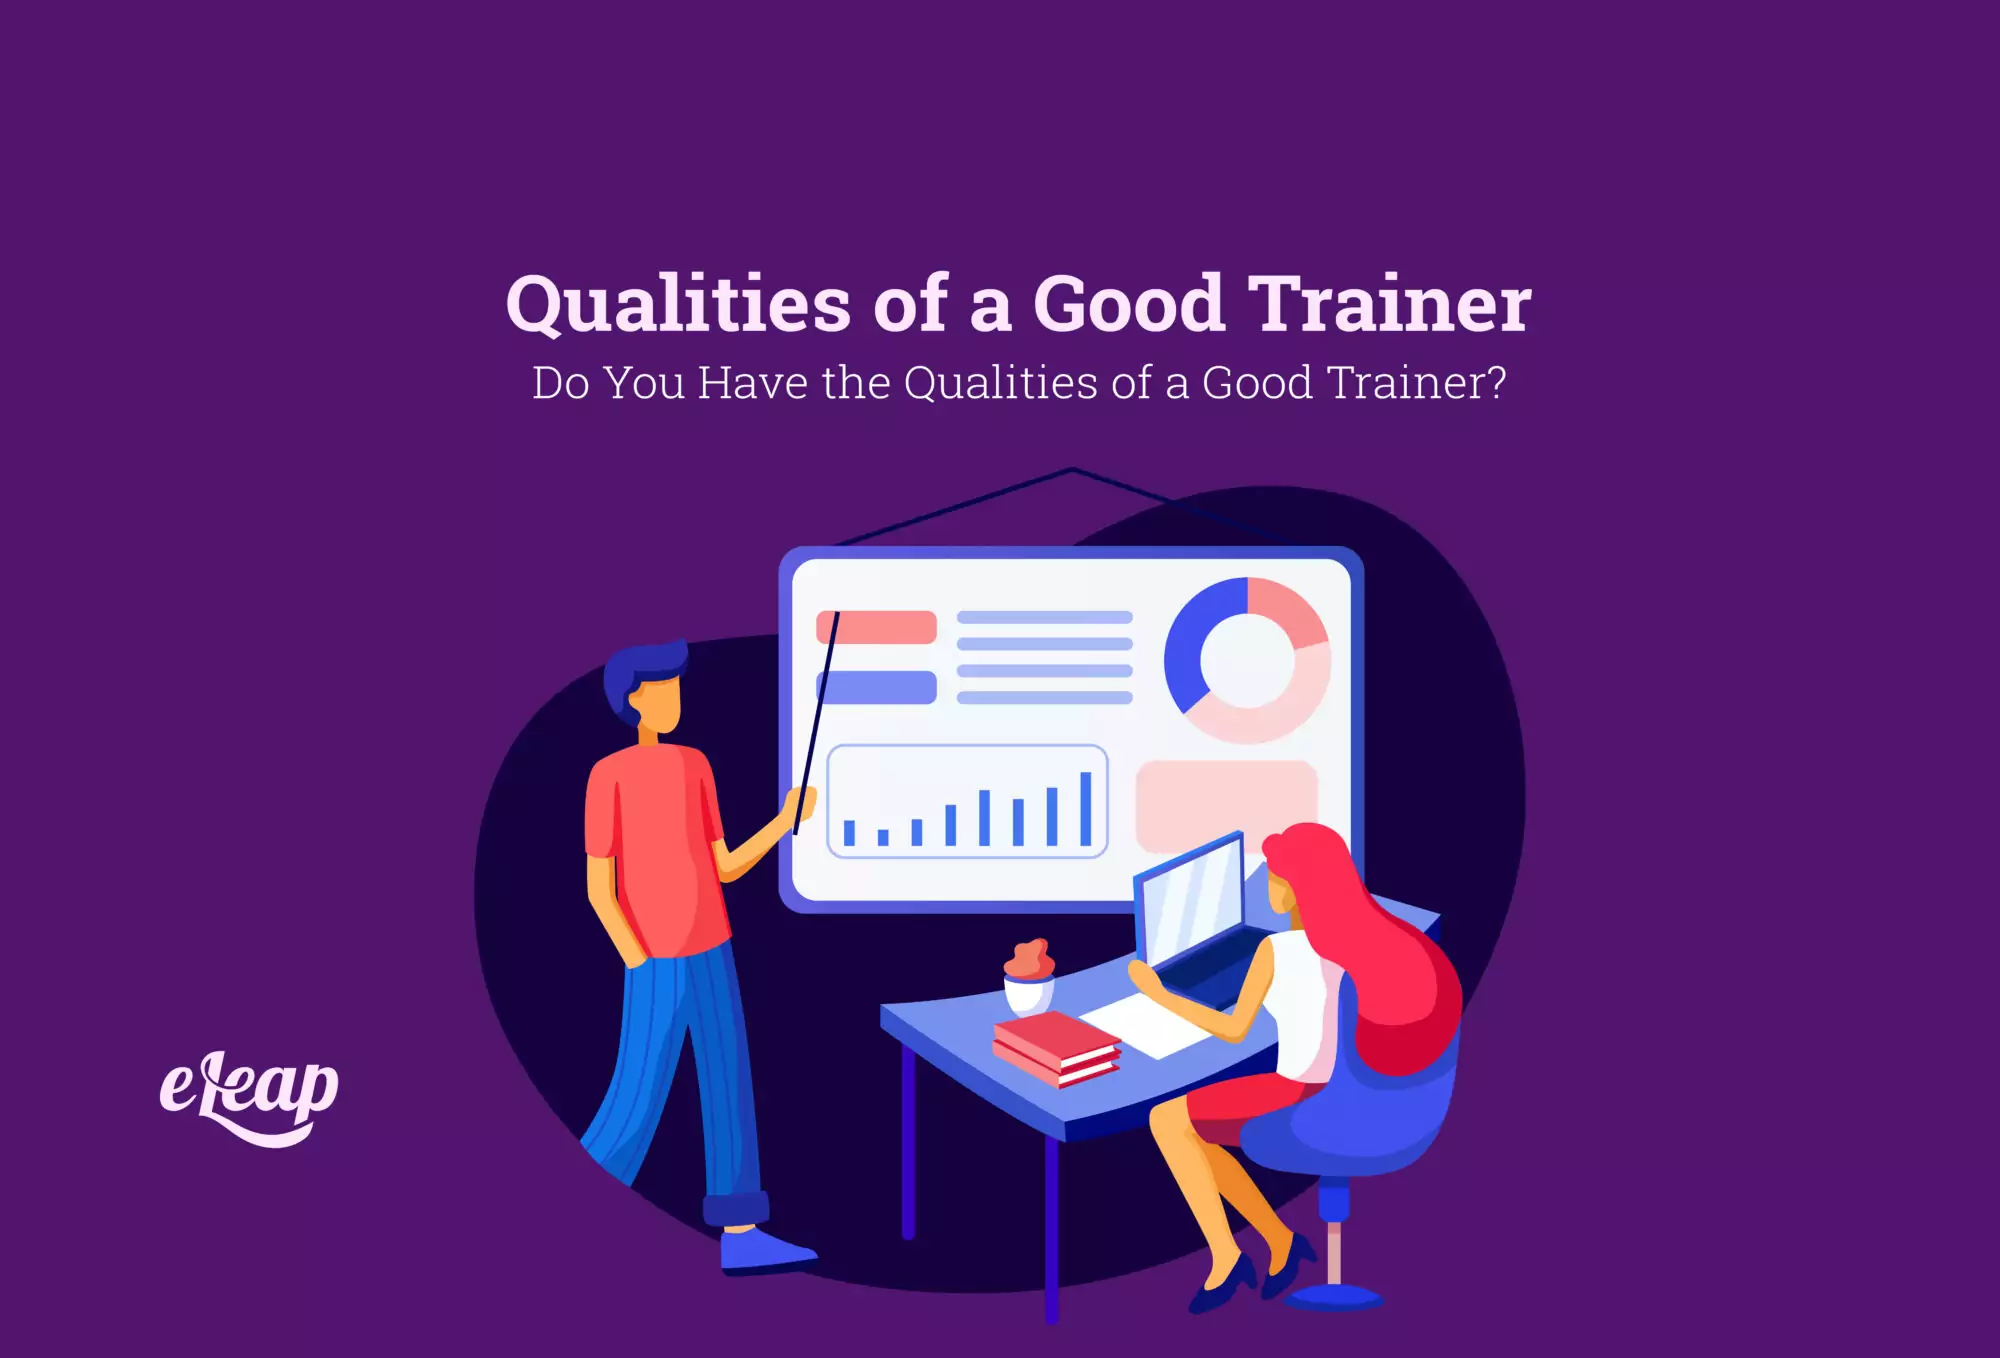 Qualities of a Good Trainer